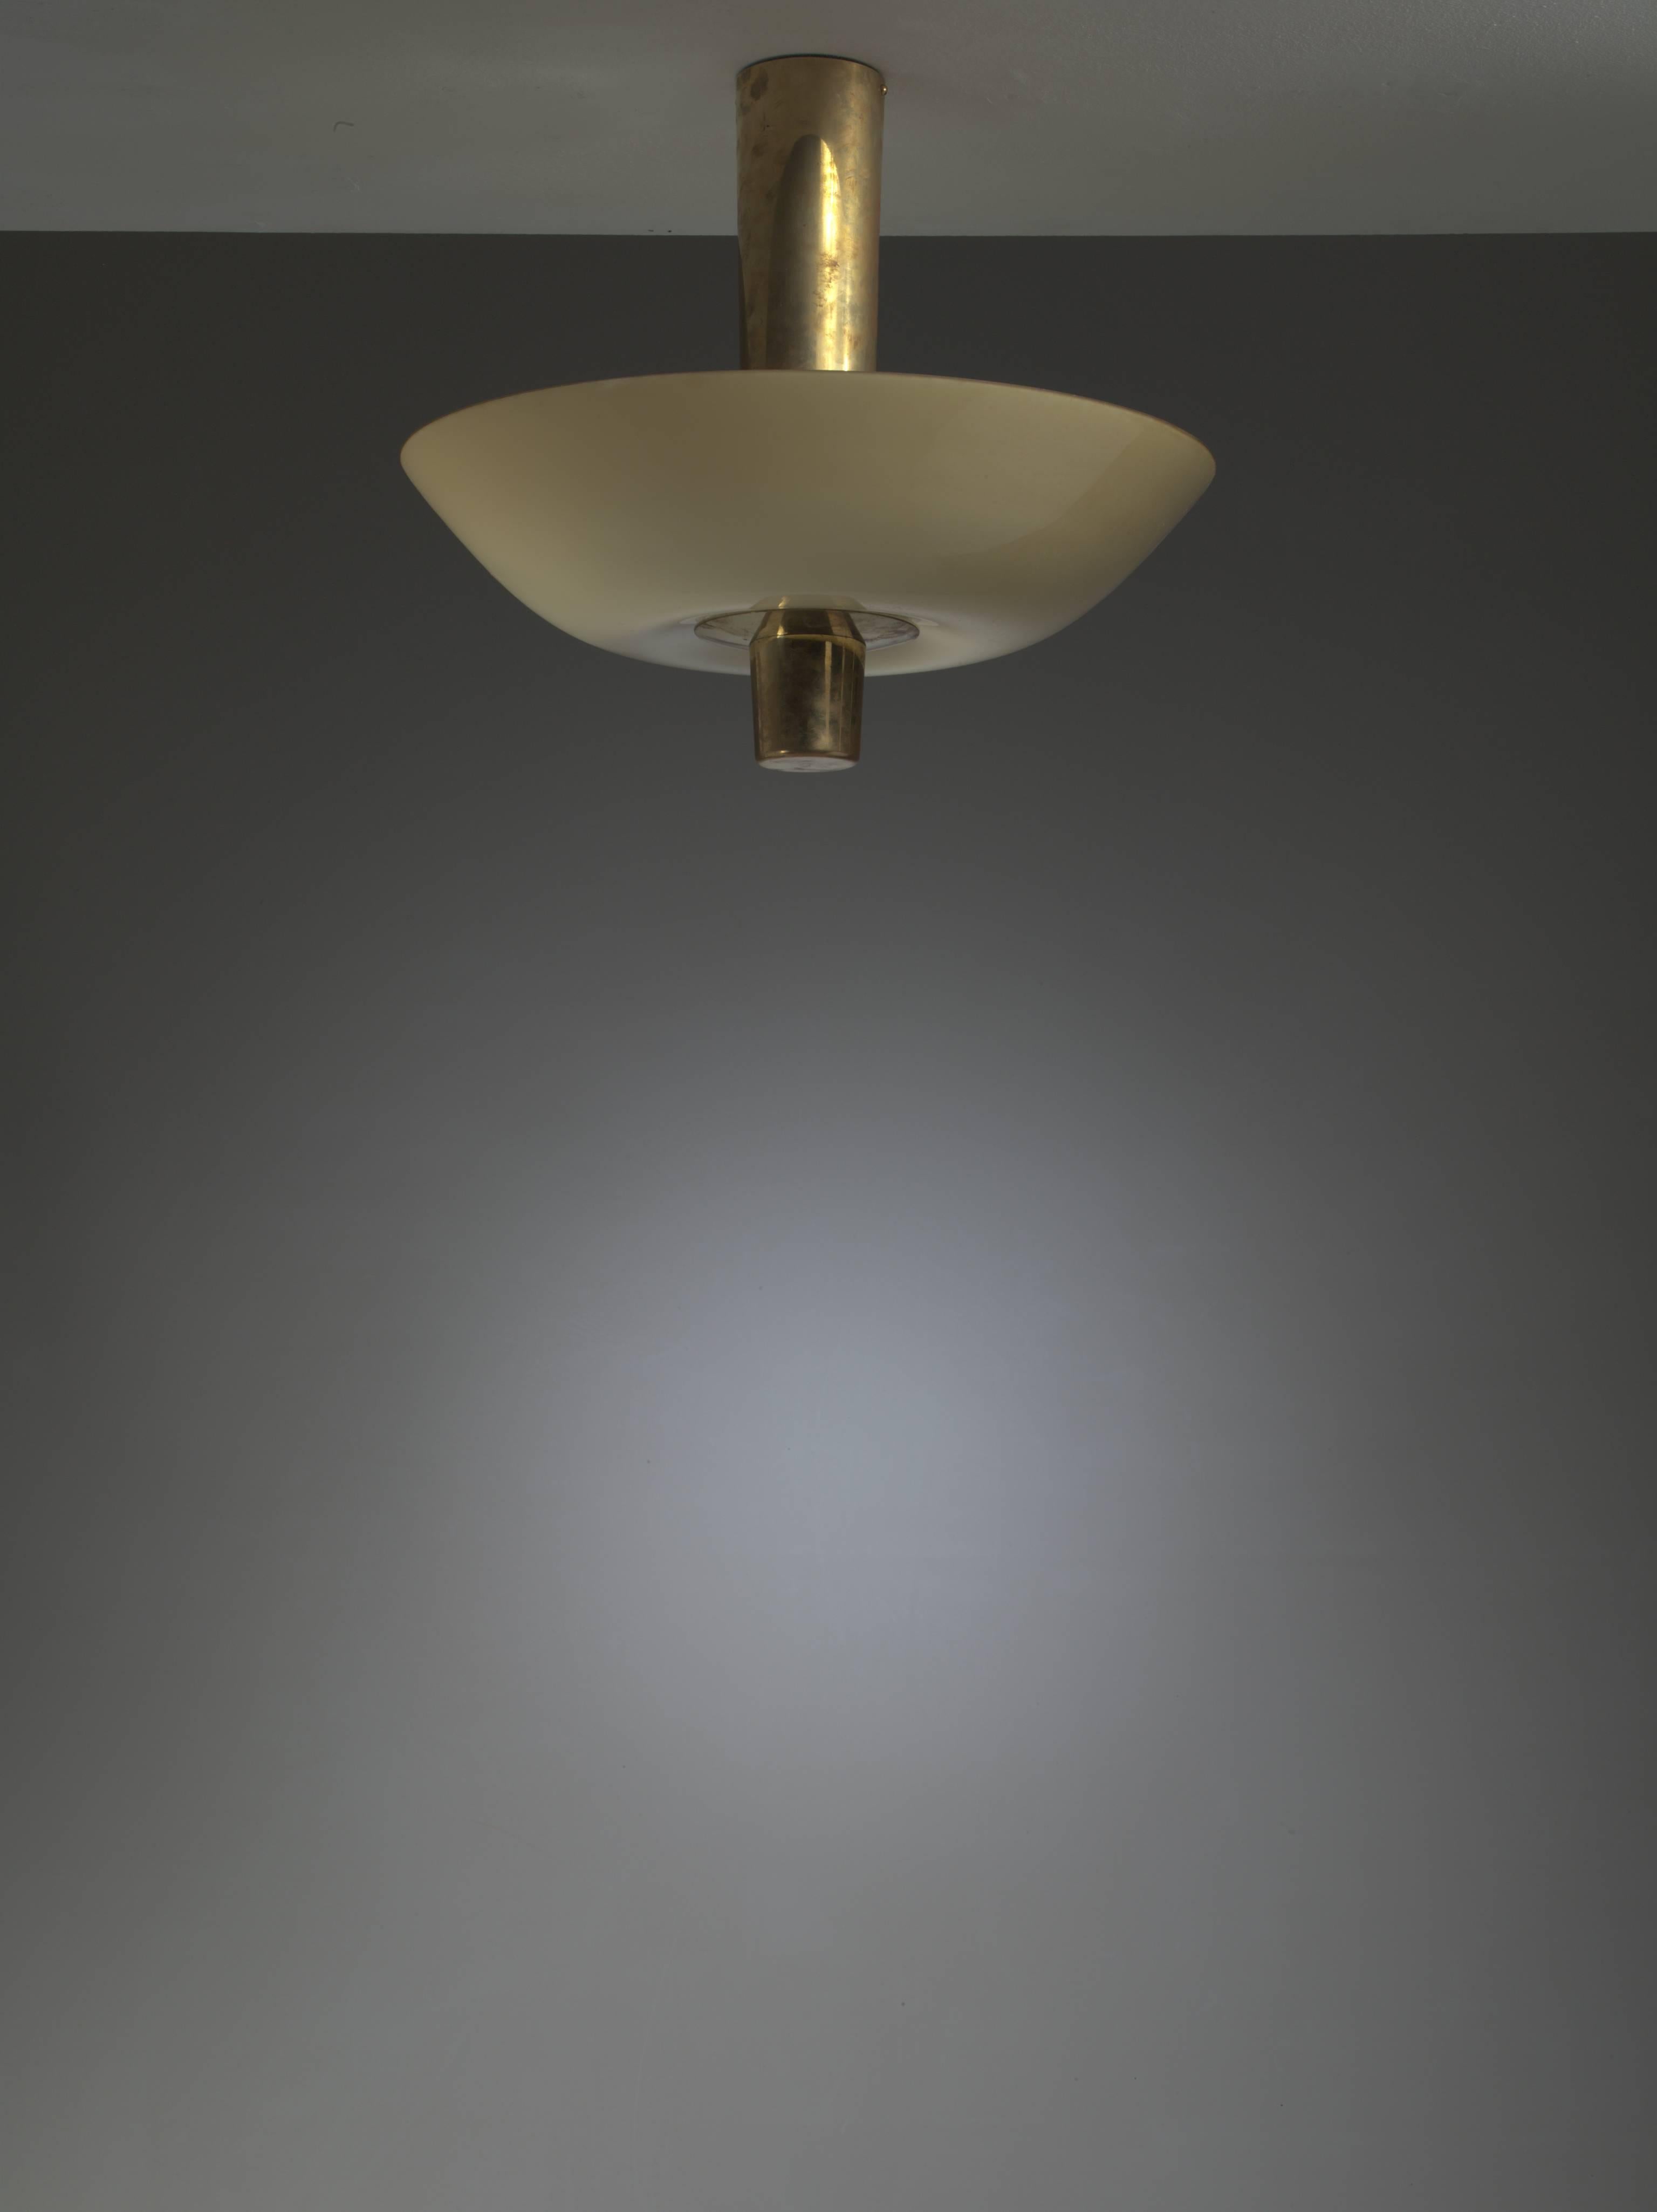 Finnish Paavo Tynell Chandelier or Flush Mount, Brass with Yellow Glass, Idman, 1950s For Sale